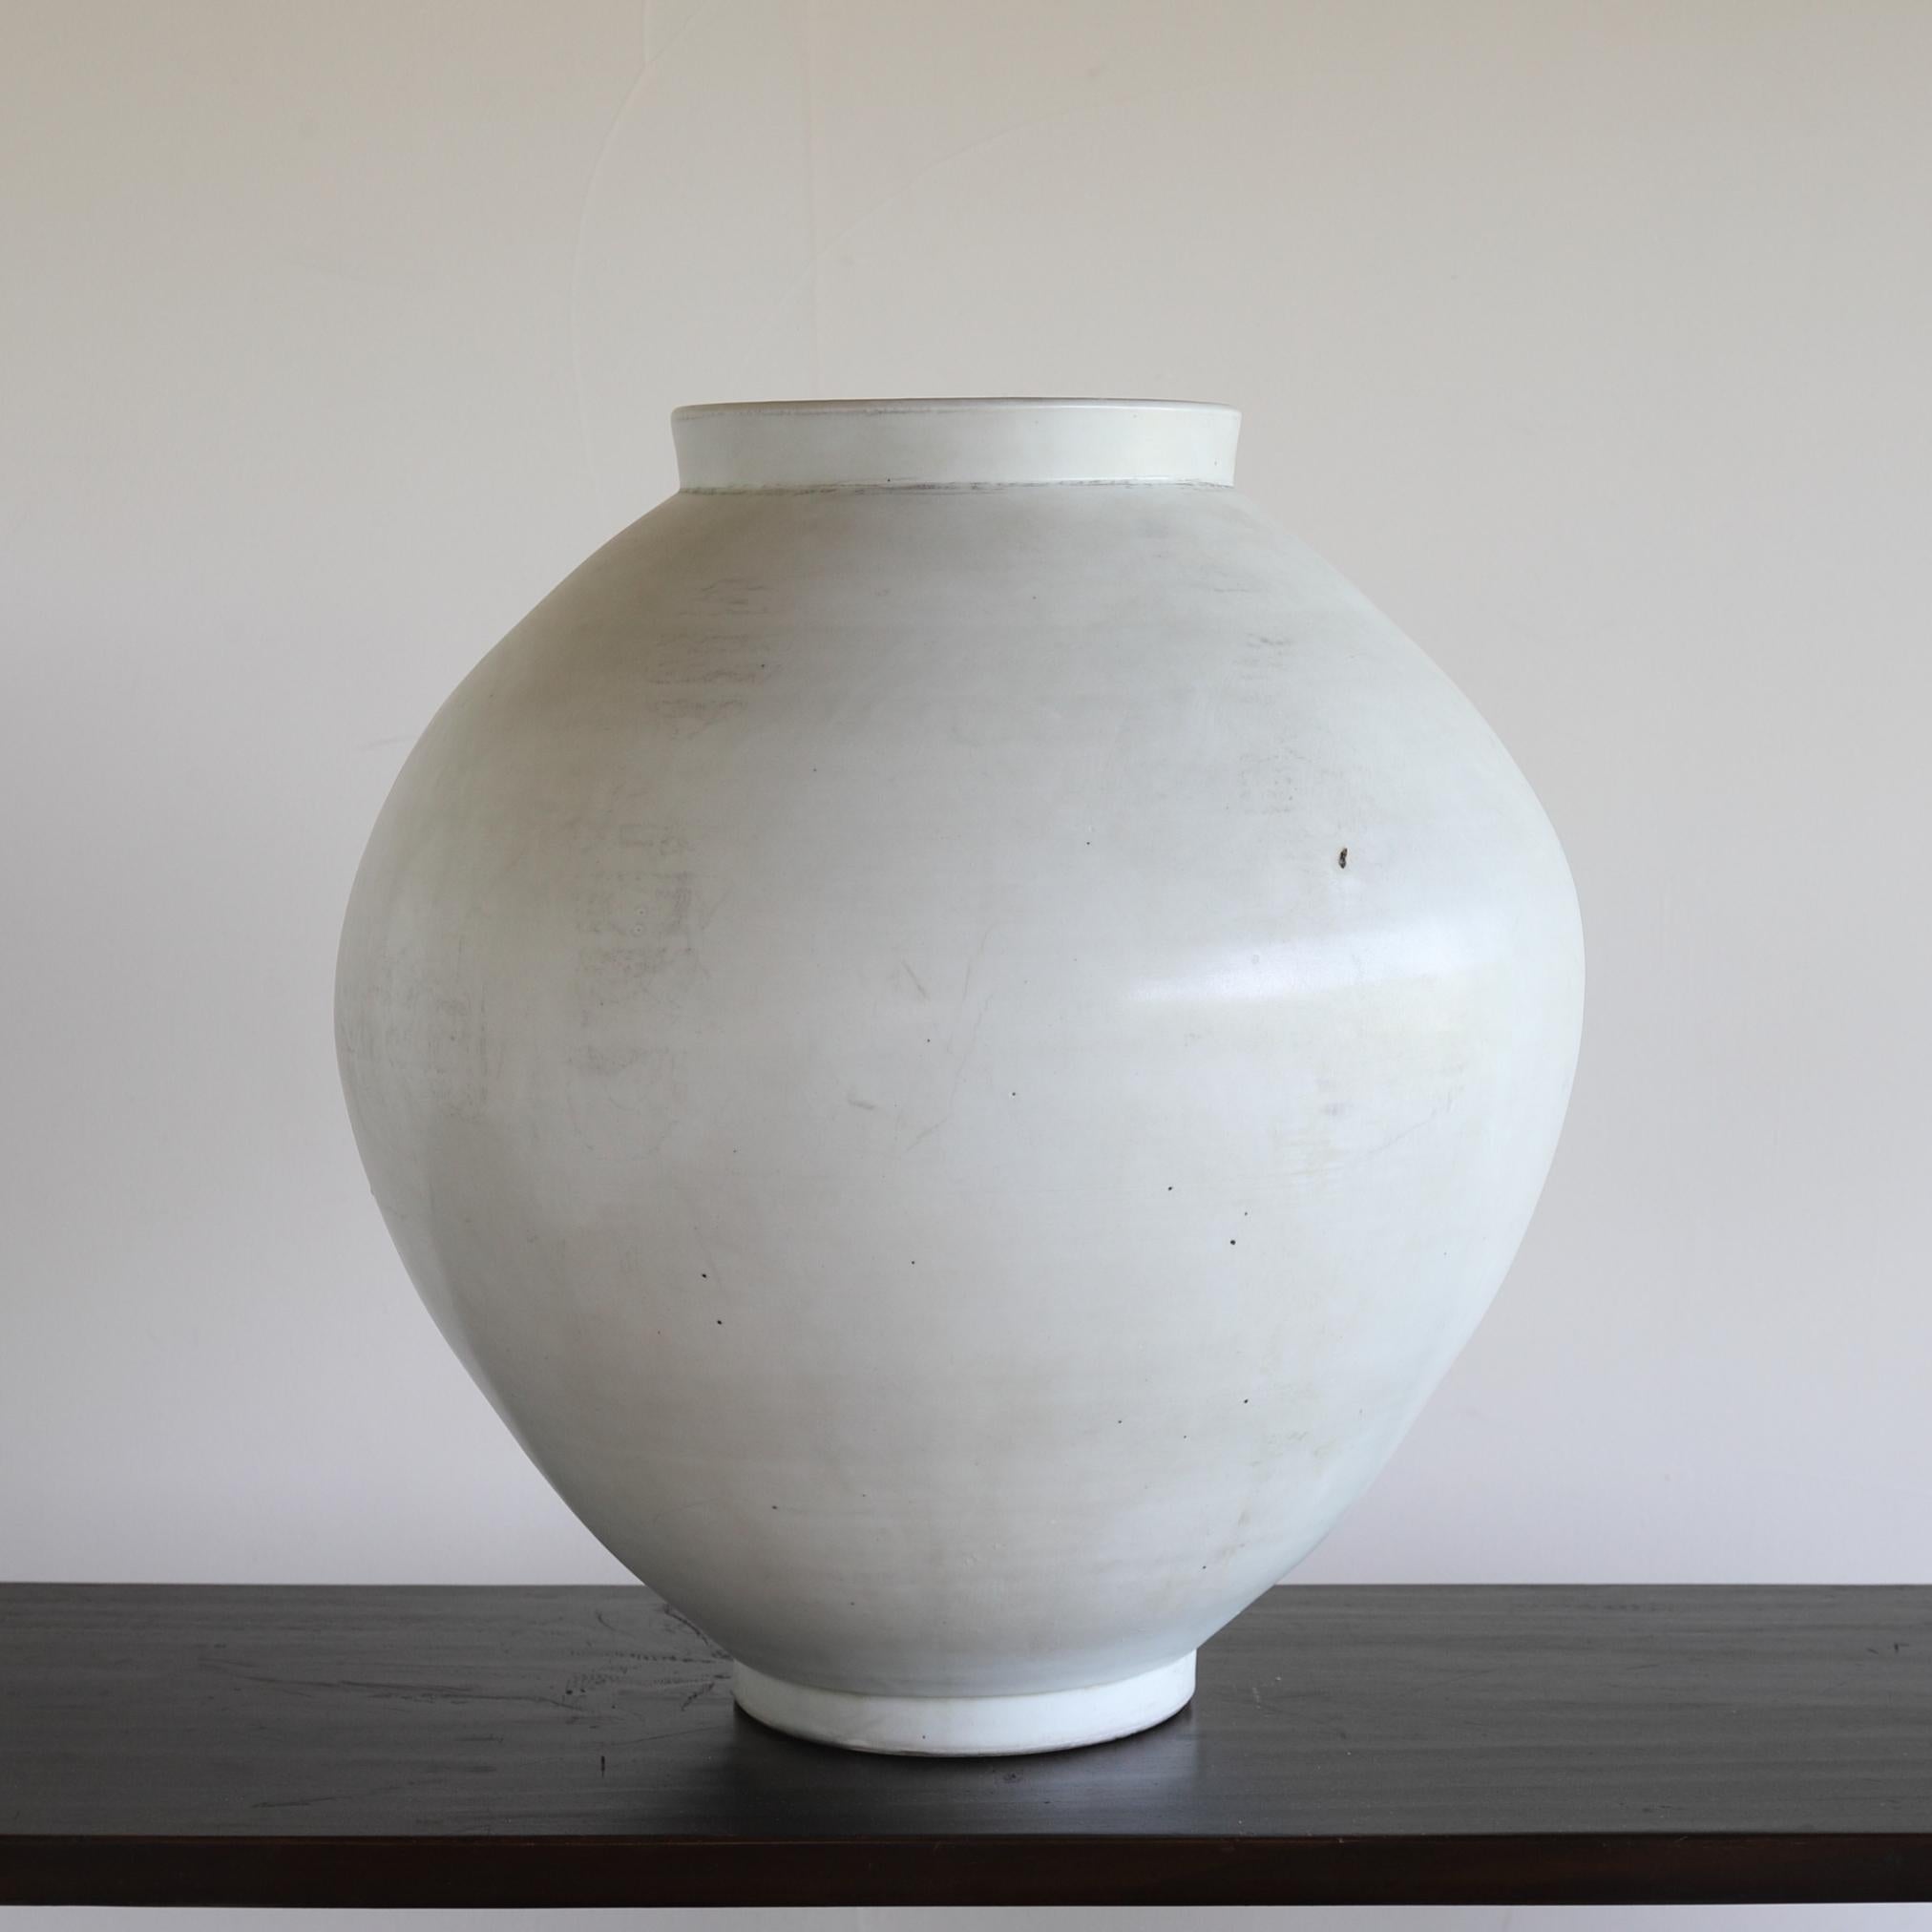 This is a white porcelain jar from the mid-Joseon period, also known as a 